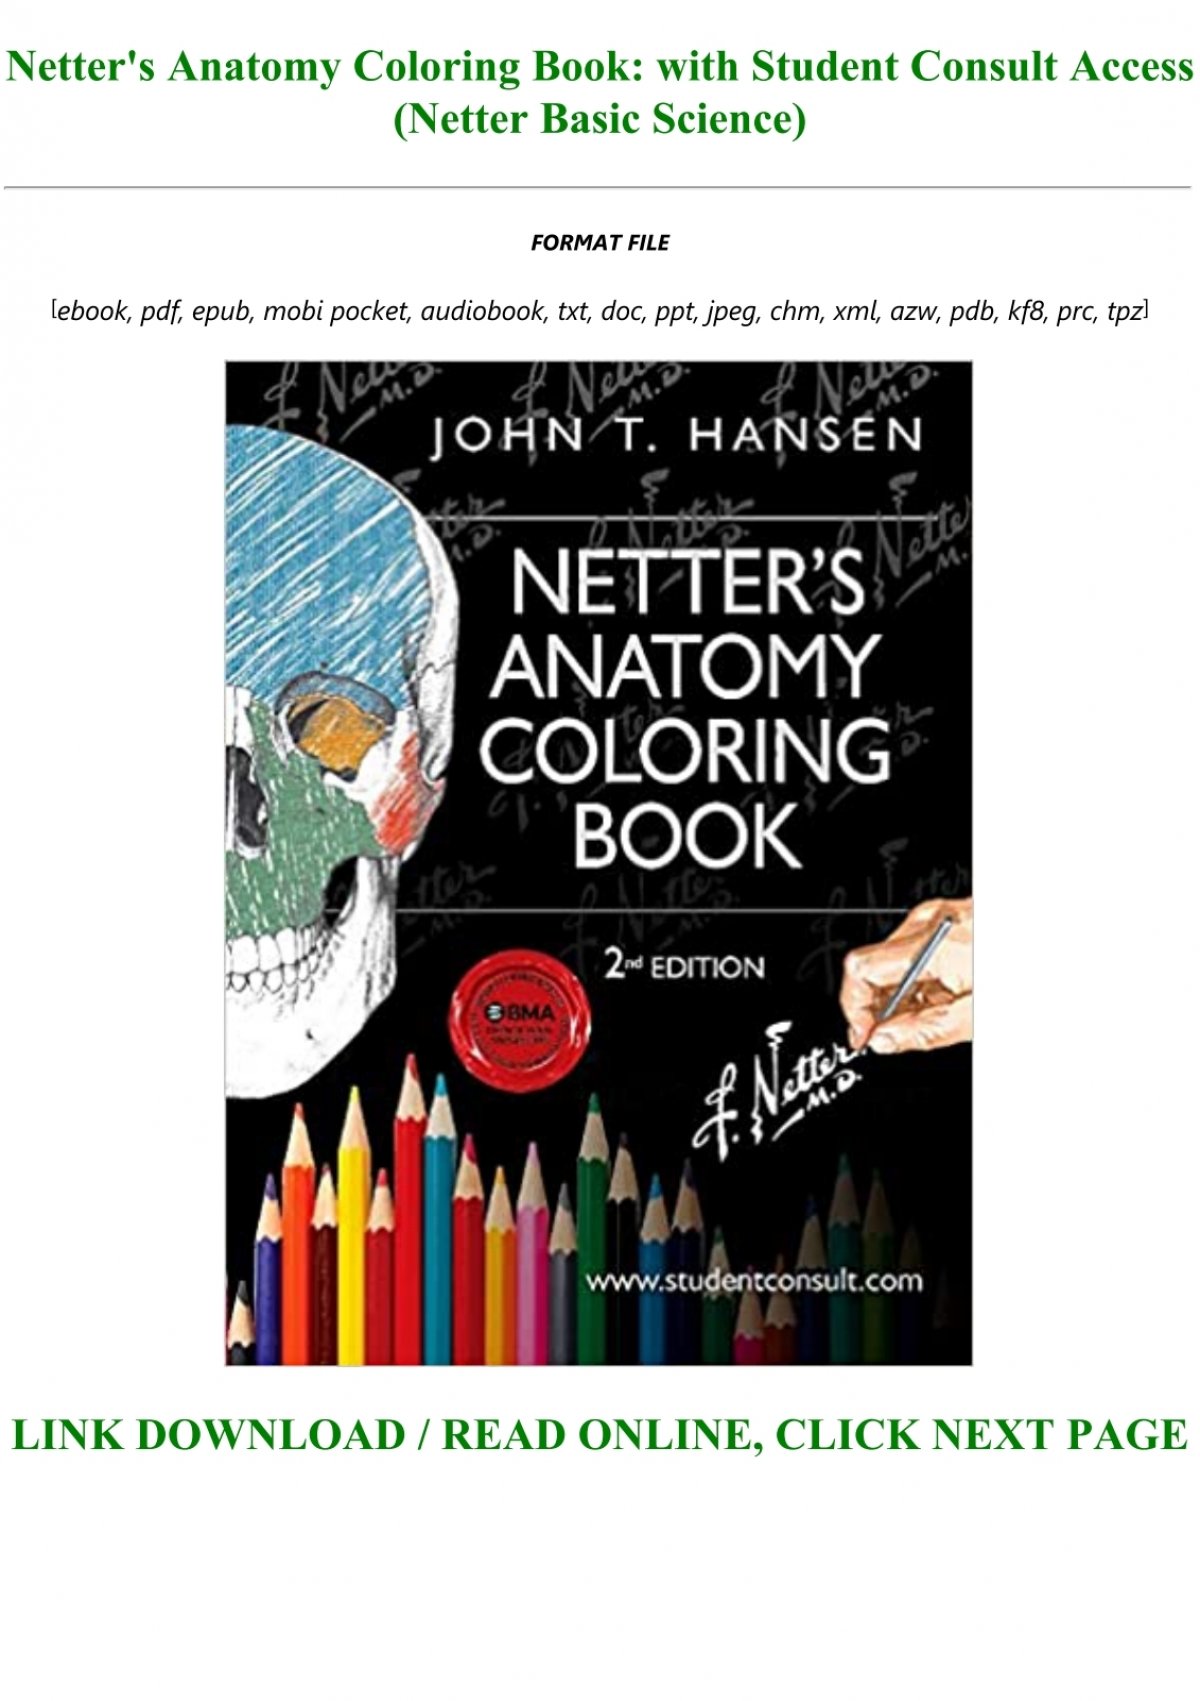 Download Free Download Netter S Anatomy Coloring Book With Student Consult Access Netter Basic Science Full